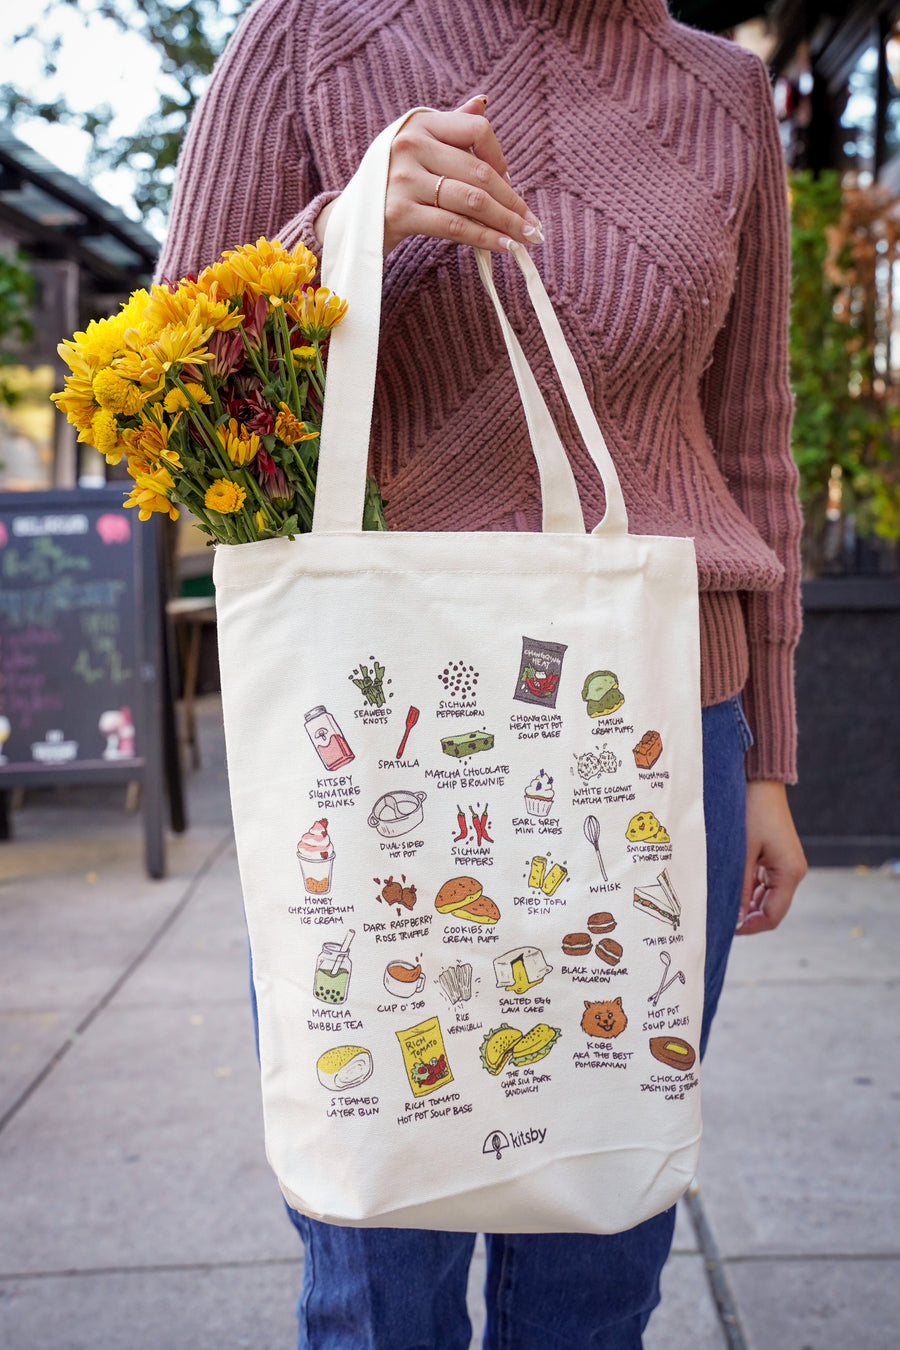 tote bag with patches